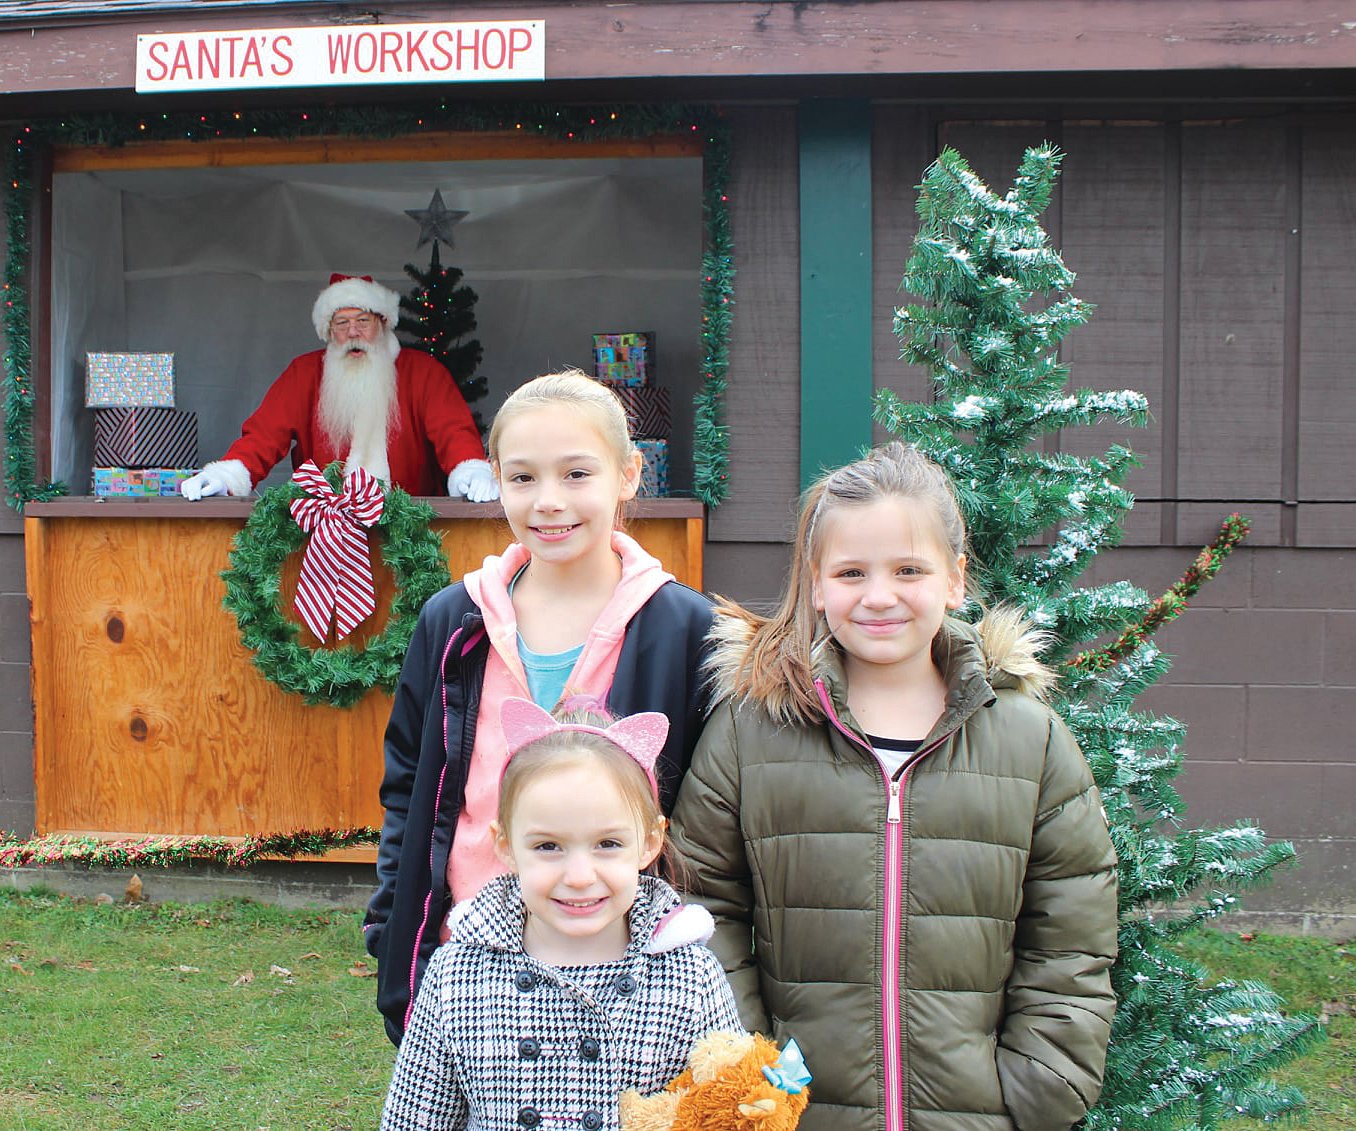 Keirstyn, Keiarra and Kinly Archer visit with Santa.